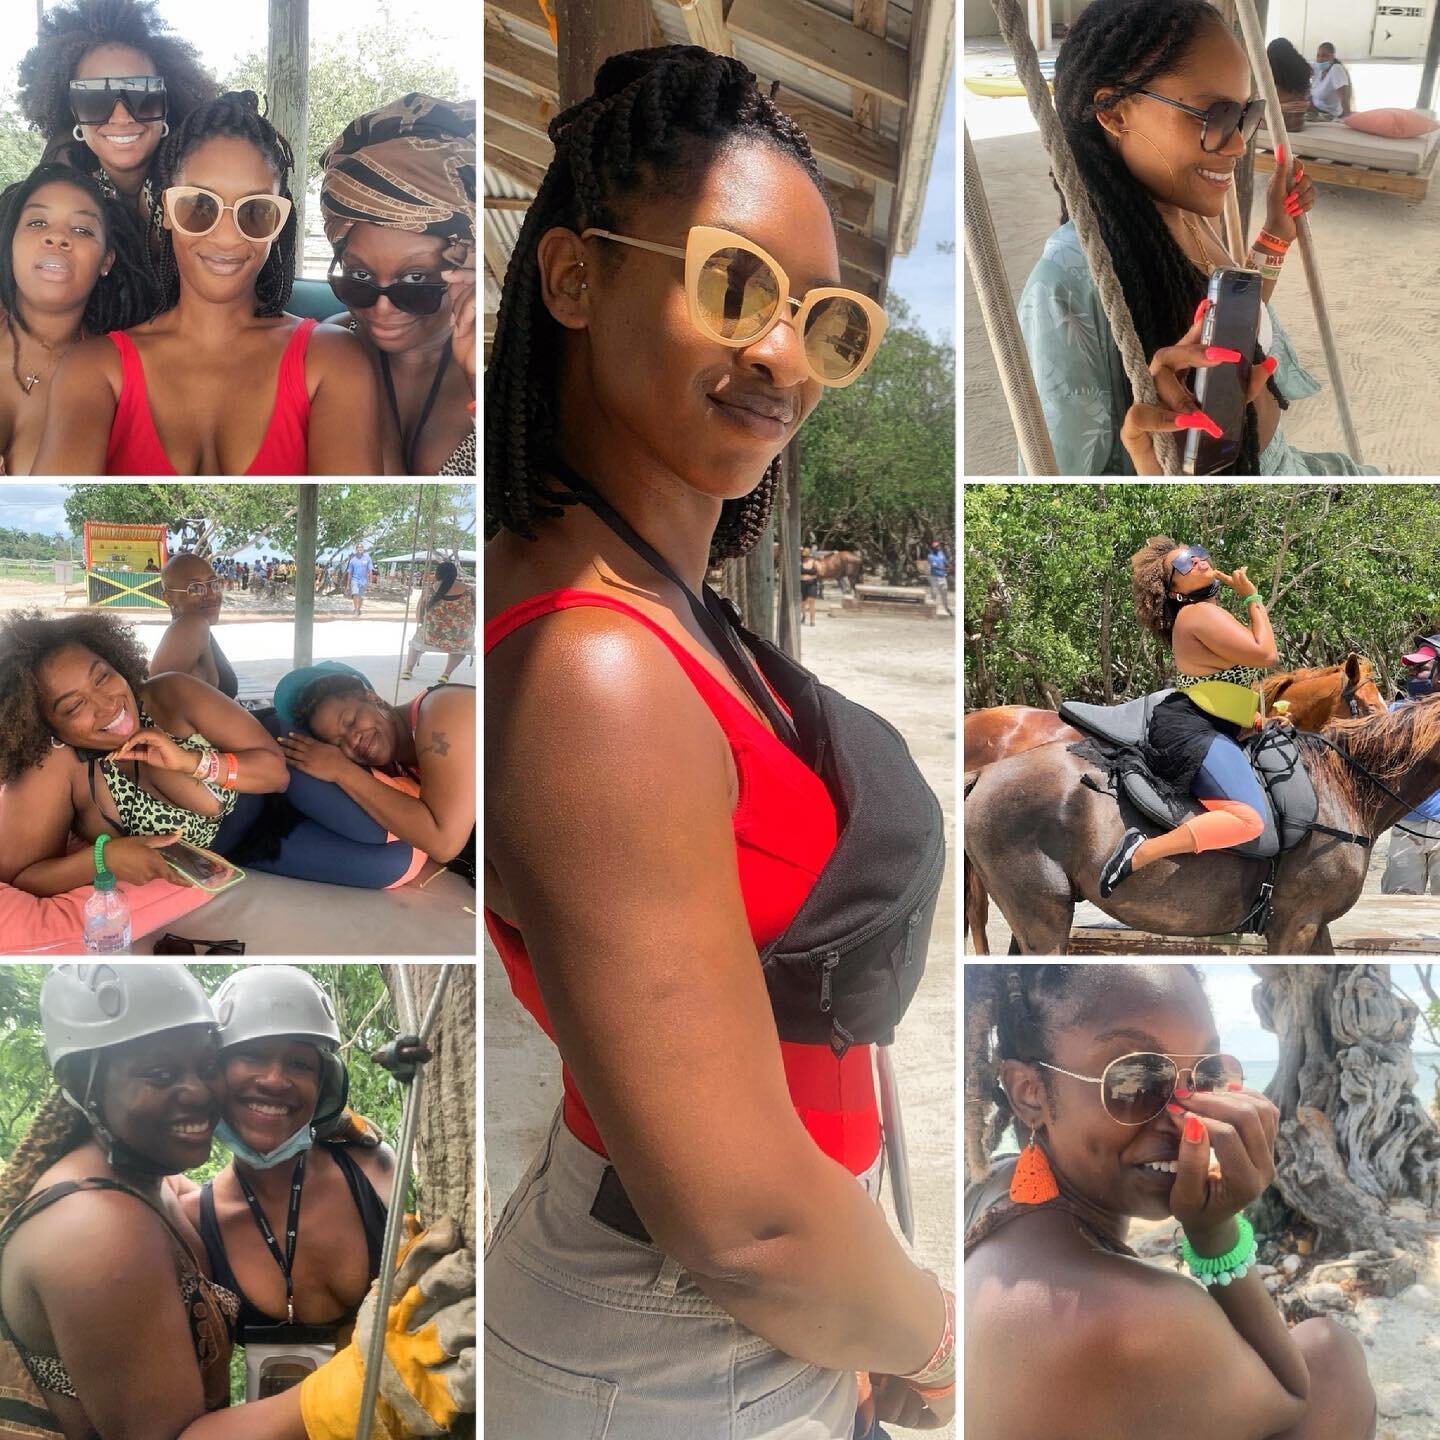 We started off our summer retreats here in Montego Bay, Jamaica with 9 beautiful women. We showed up not knowing what to expect and have all been greeted with safe spaces to bloom in our unique personalities. You have seen the images of us laughing, 